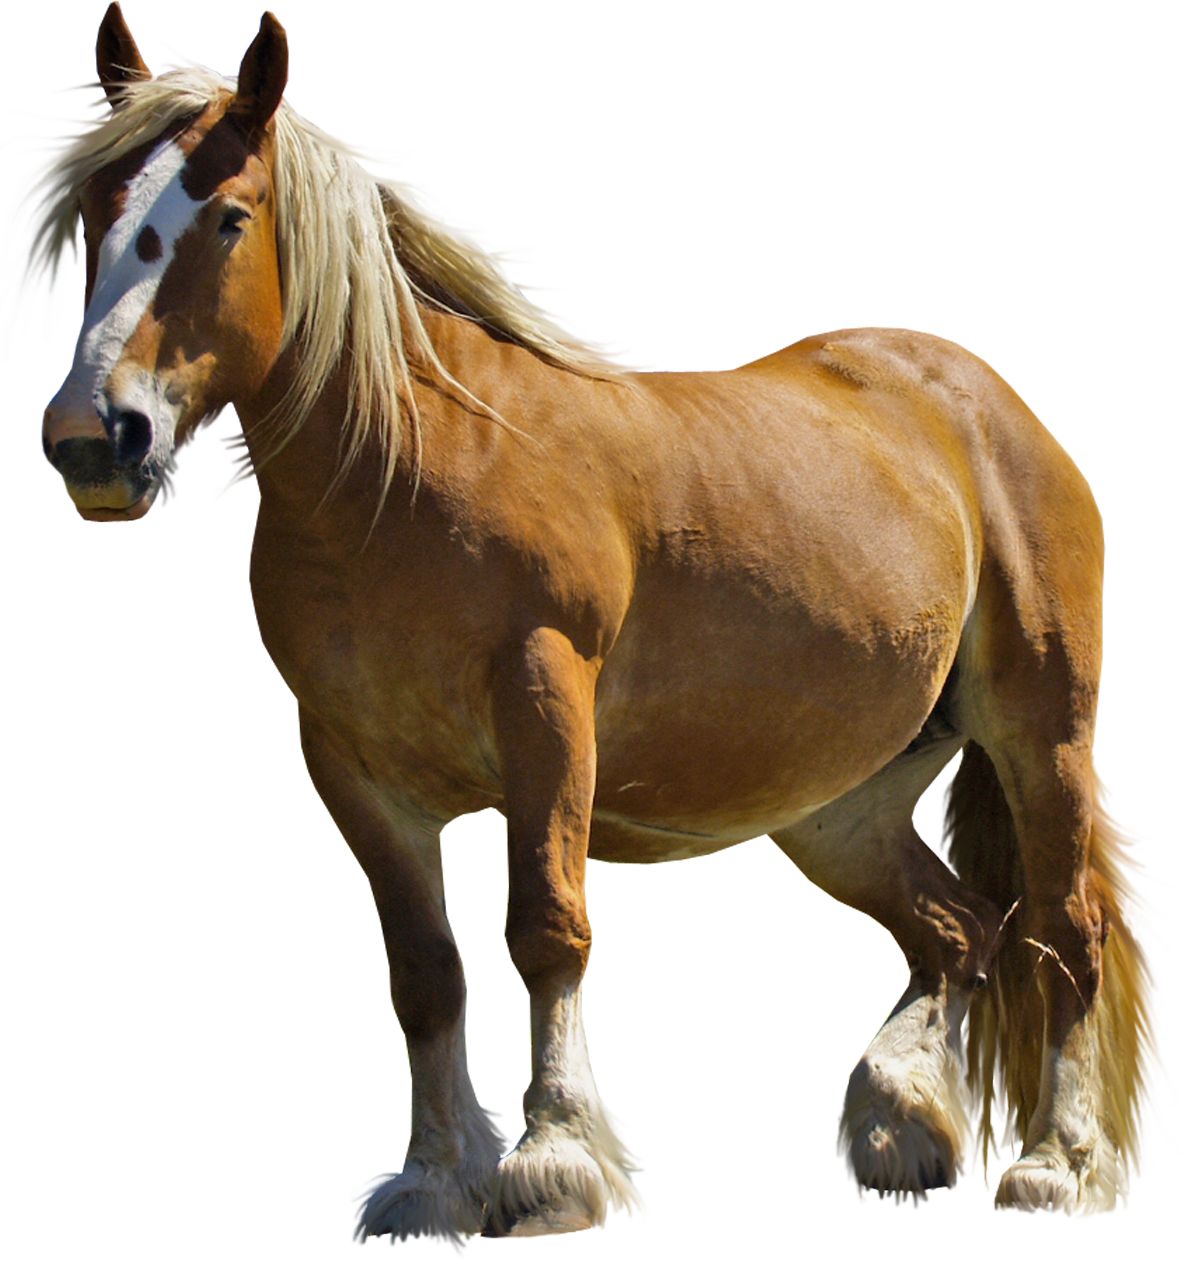 Horse Png Image - Horse, Transparent background PNG HD thumbnail